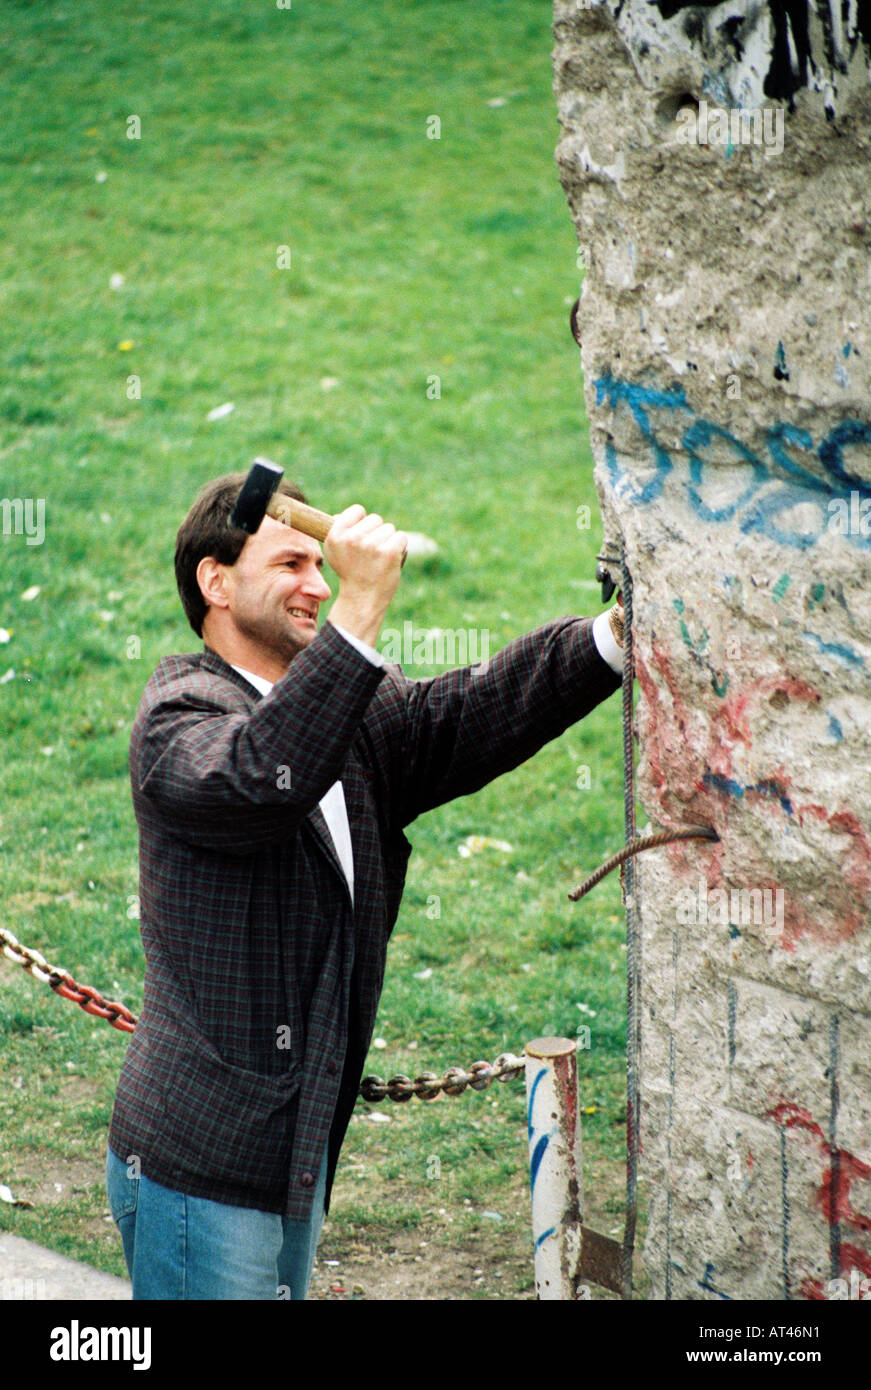 The Fall of the Berlin wall, 1989. A souvenir hunter cuts pieces of the wall. Stock Photo